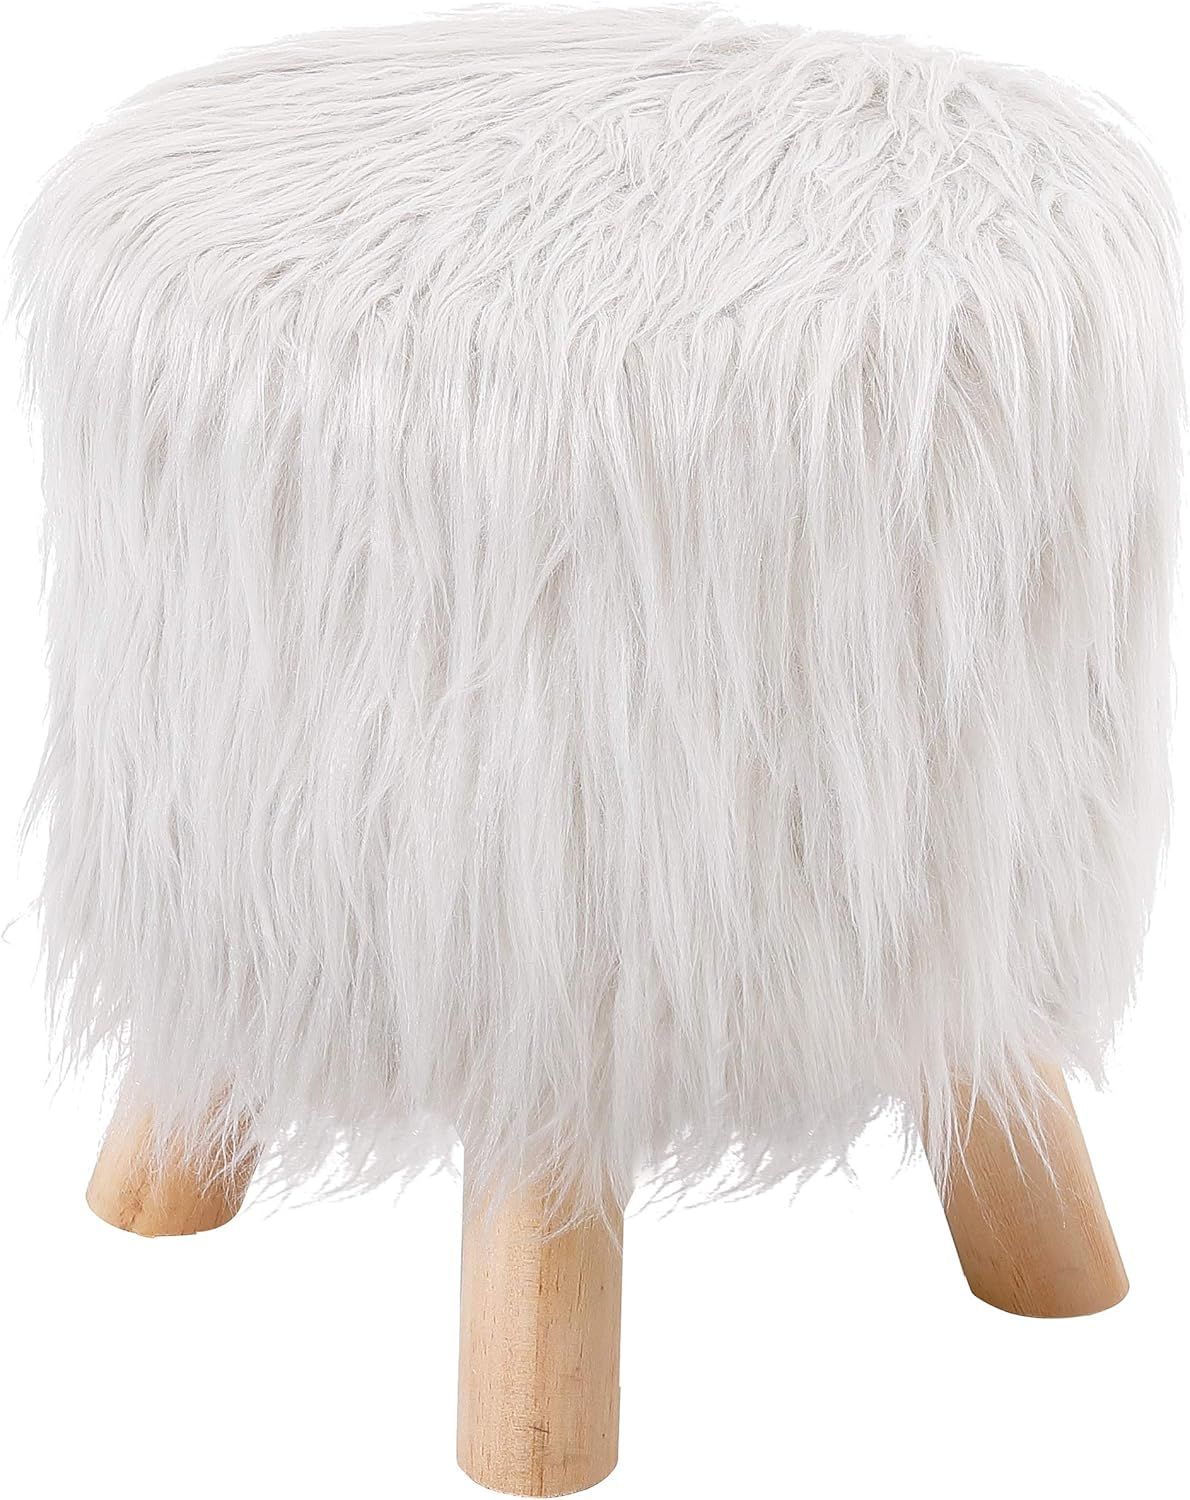 BirdRock Home White Faux Fur Foot Stool Ottoman – Soft Compact Padded Seat - Living Room, Bedro... | Amazon (US)